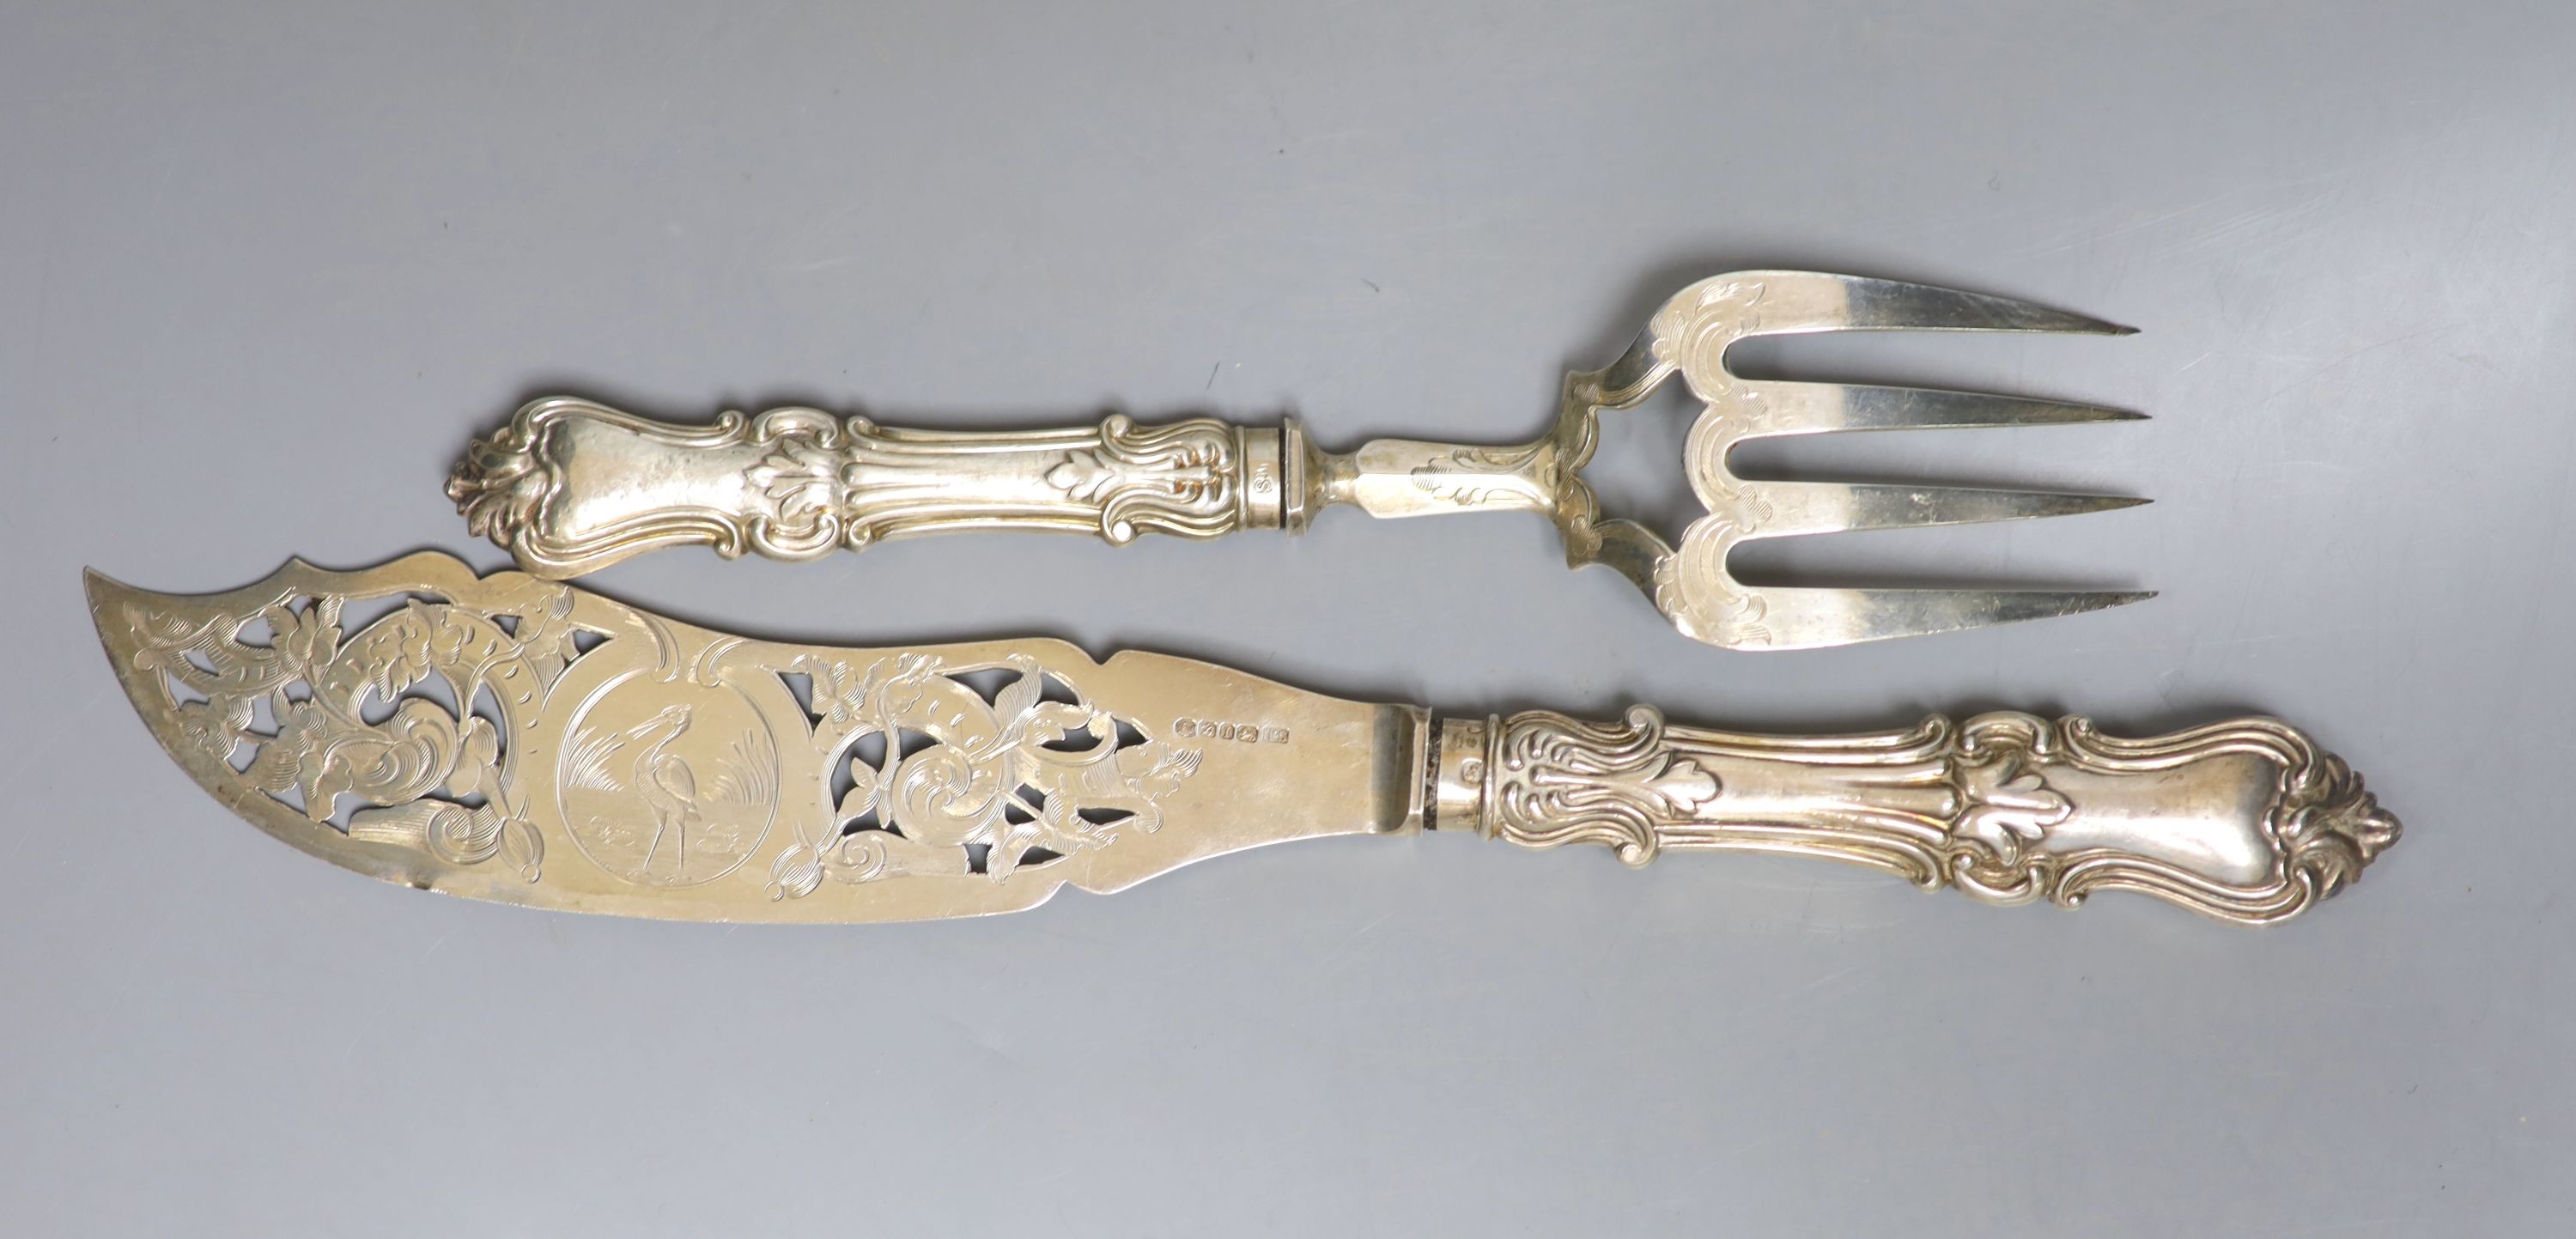 A pair of Victorian silver fish servers, Thomas Sansom, Sheffield, 1852, knife 33.5cm, loaded handles.